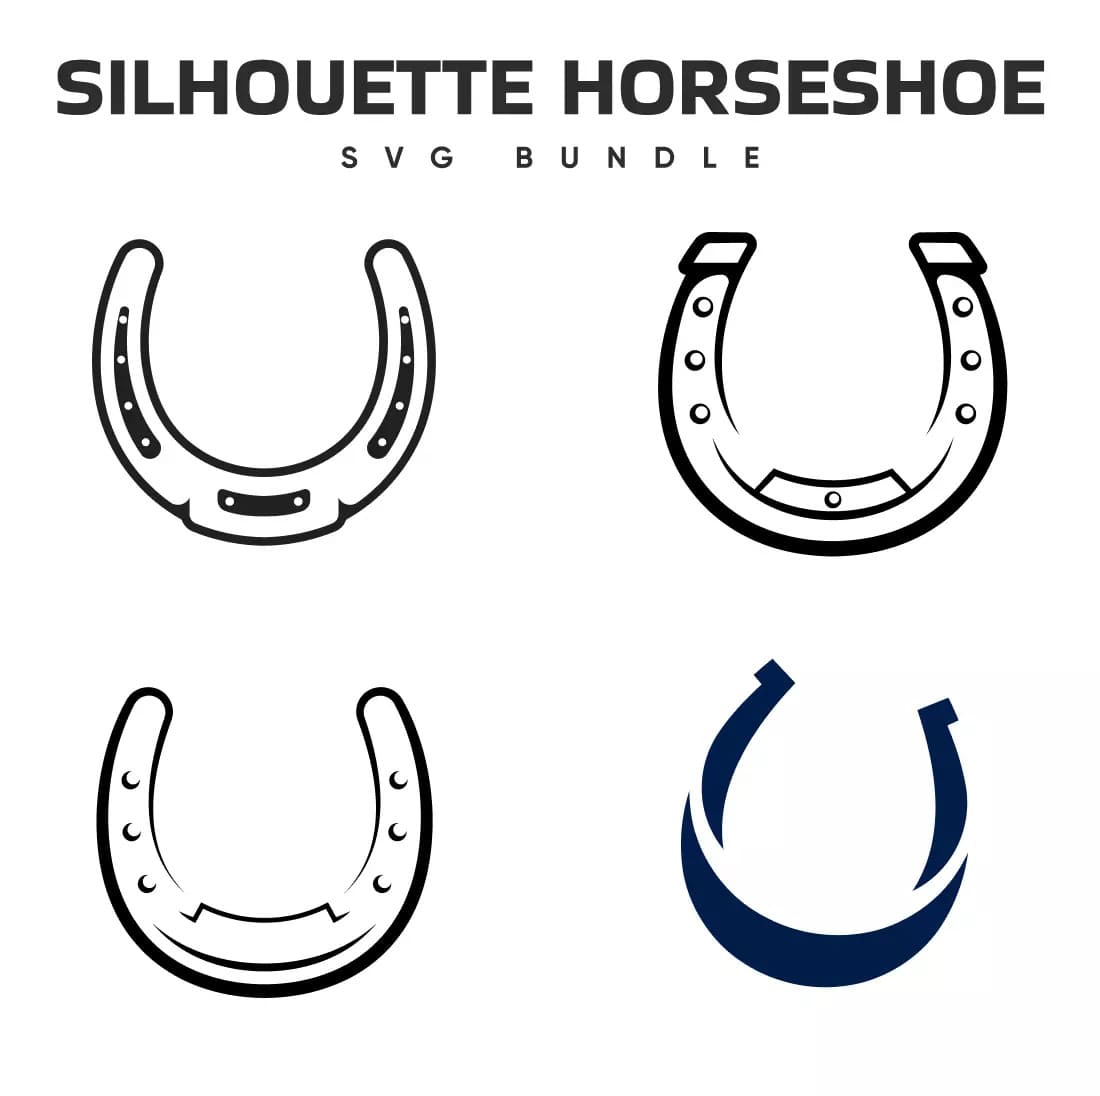 Set of four horseshoes with different designs.